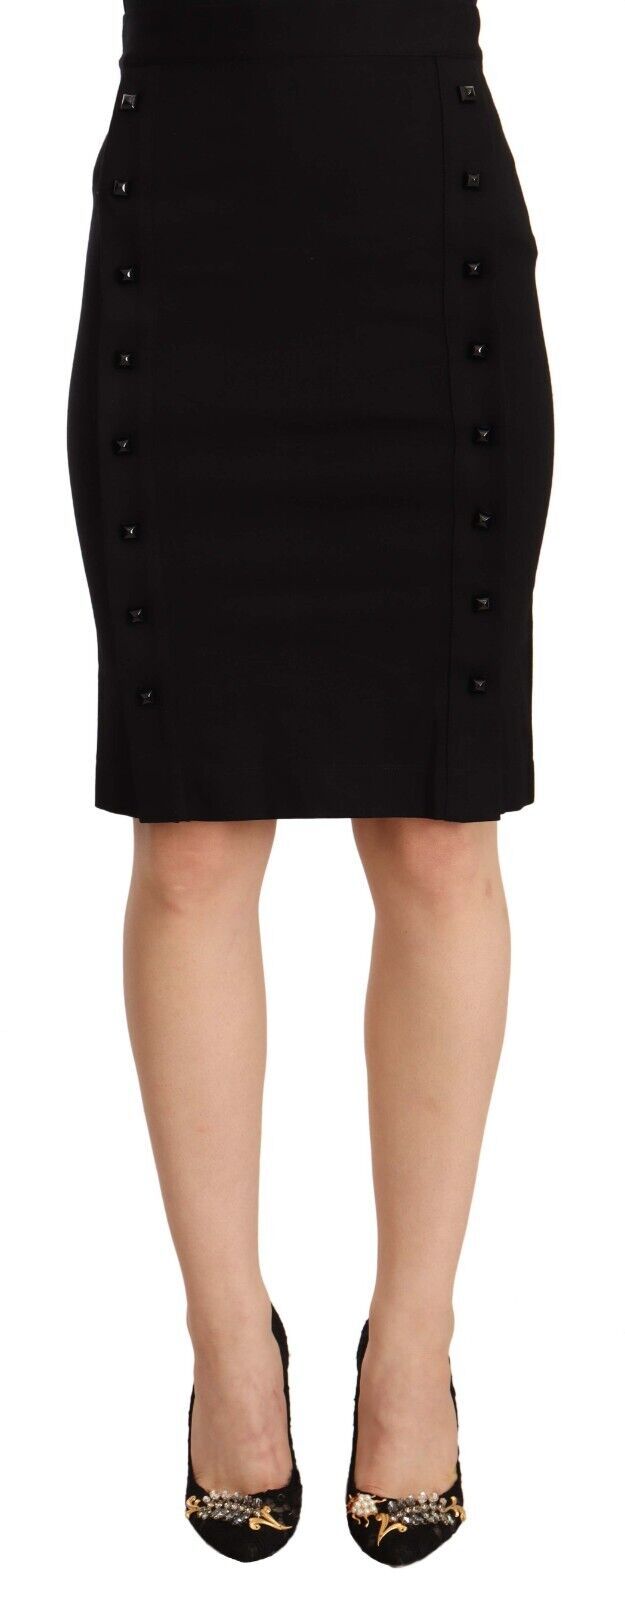 GF Ferre Chic High-Waisted Pencil Skirt in Women's Black